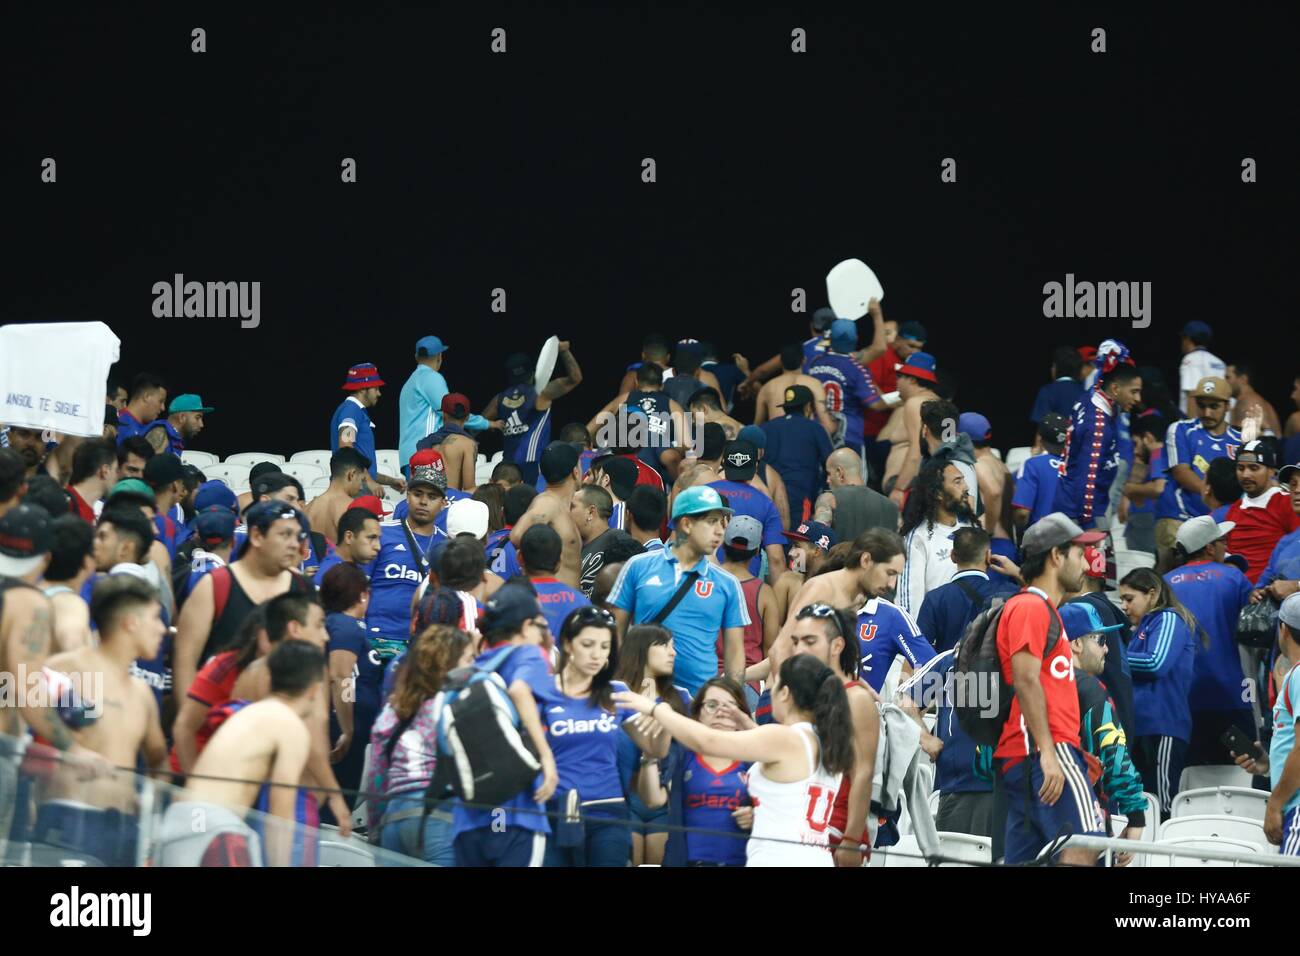 Fans of Universidad de Chile provoke Corinthians fans before the match validated by the first round of the 2017 South American Cup, at the Corinthians Arena, on the night of Wednesday, 05. (PHOTO: ADRIANA SPACA/BRAZIL PHOTO PRESS) Stock Photo